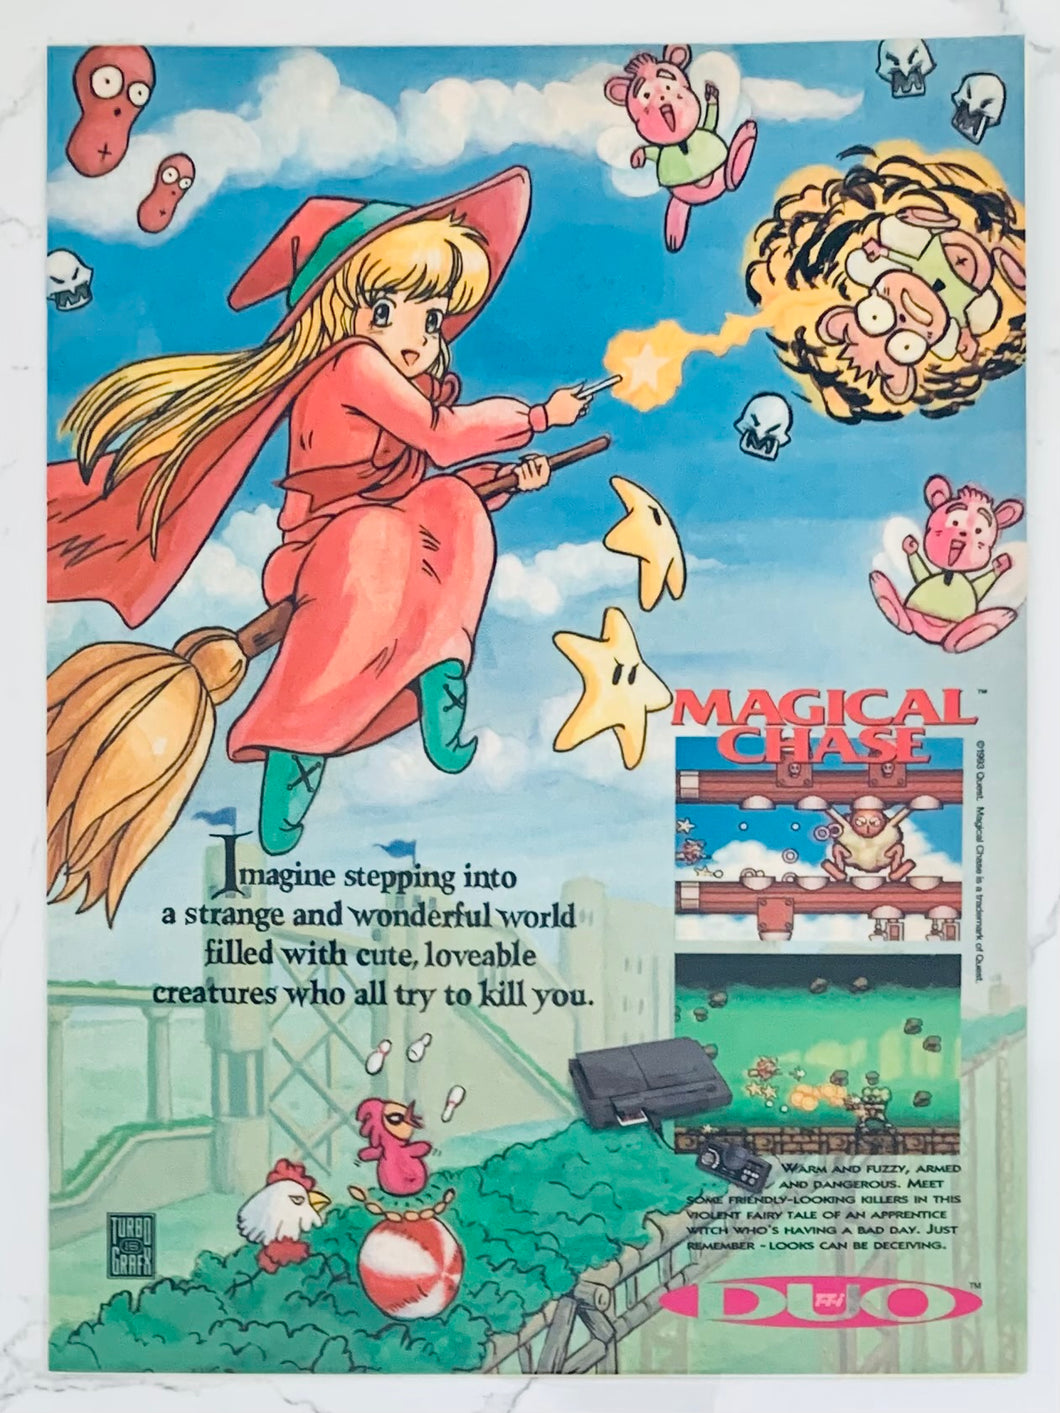 Magical Chase - TurboDuo - Original Vintage Advertisement - Print Ads - Laminated A4 Poster